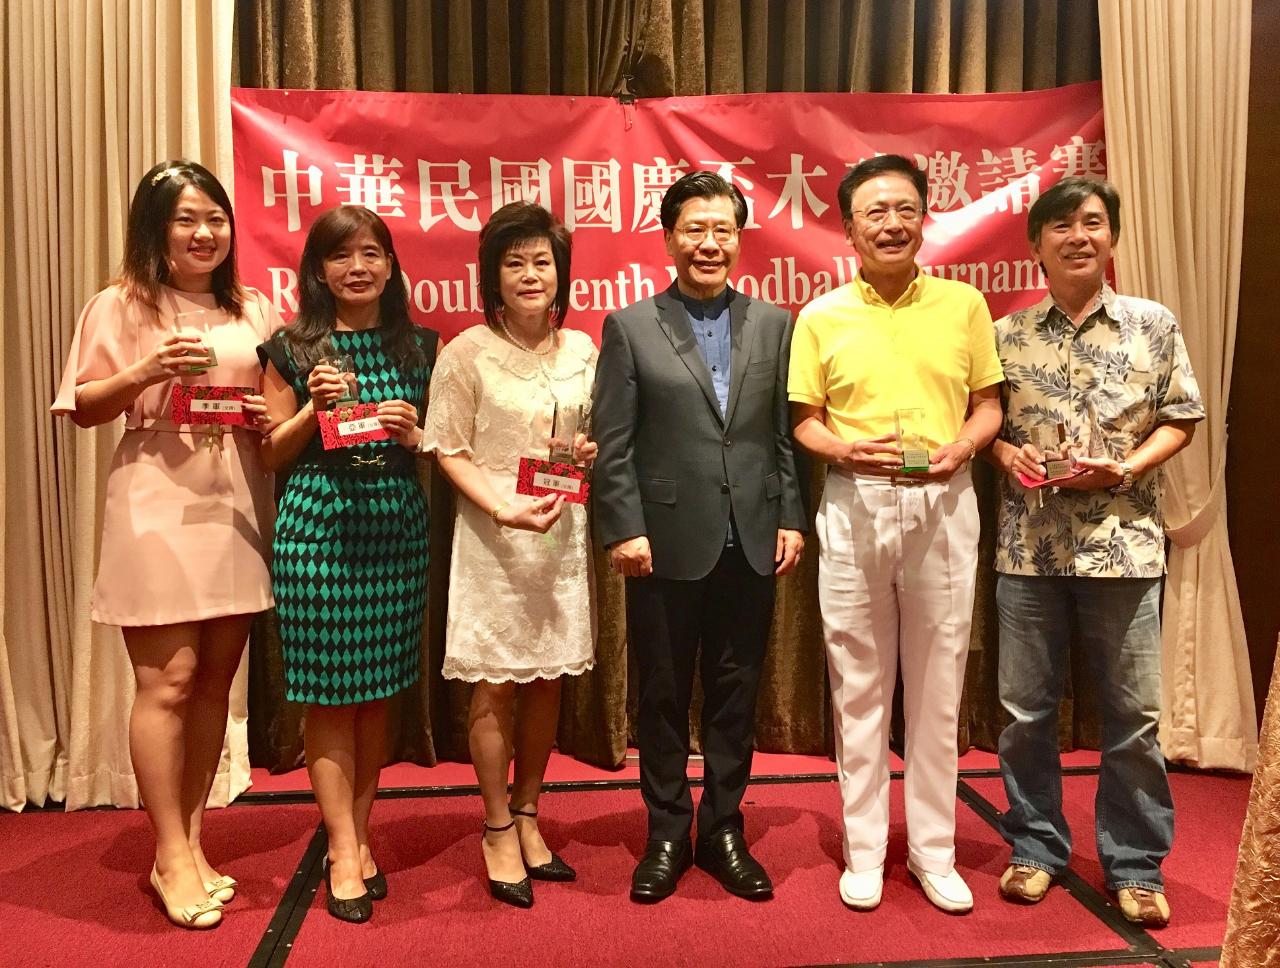 2.	A group photo of Representative Francis Liang (in black) with the participants of the ROC 108th Double Tenth Woodball Invitation Championship. (2019/09/08)